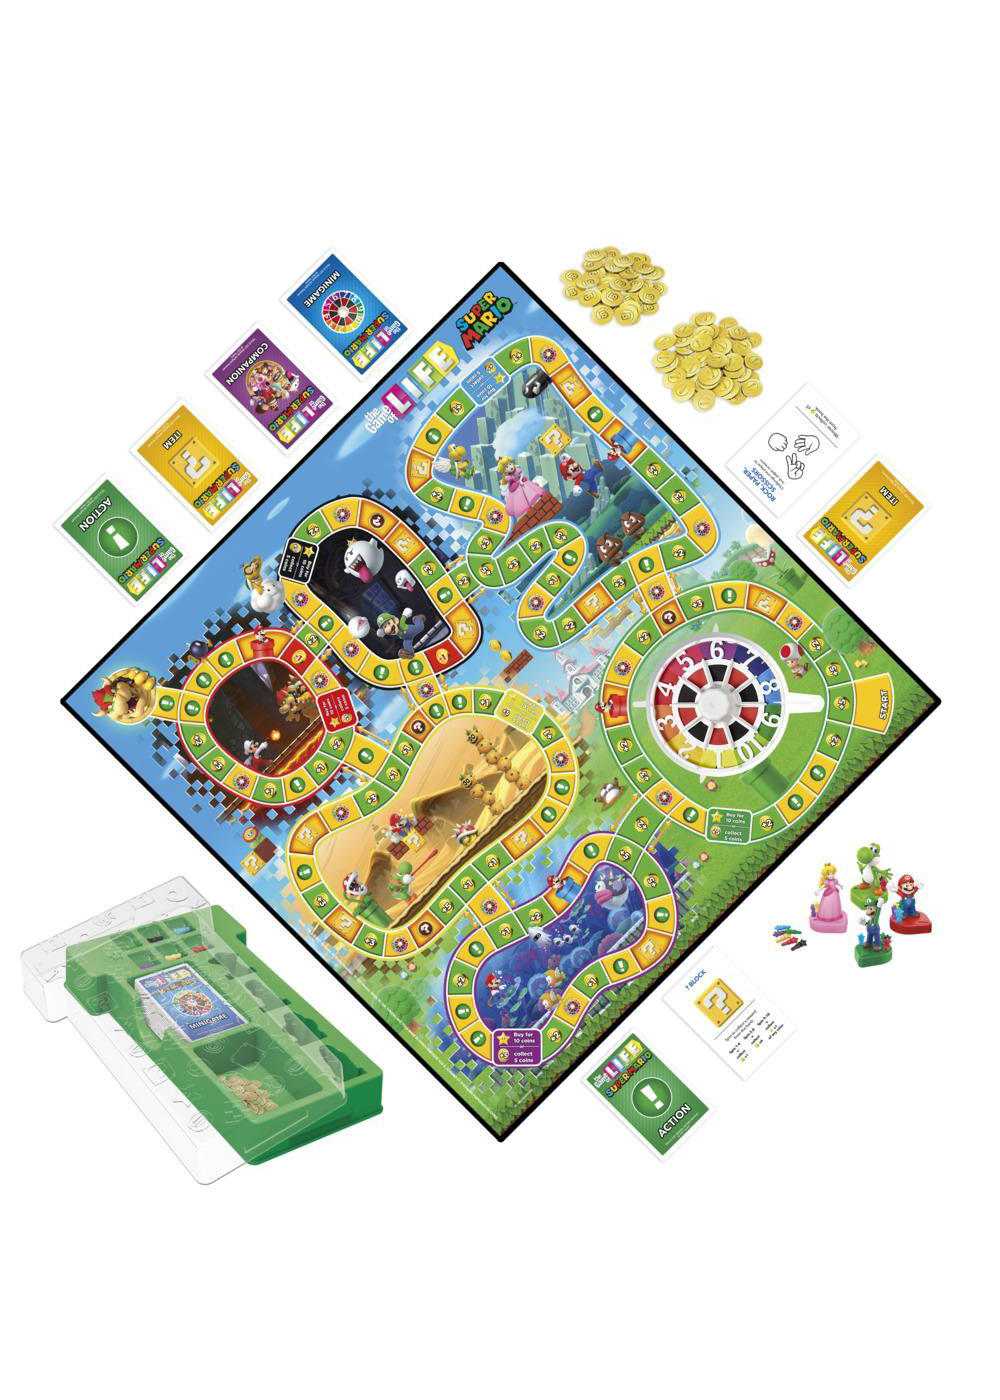 The Game of Life Board game